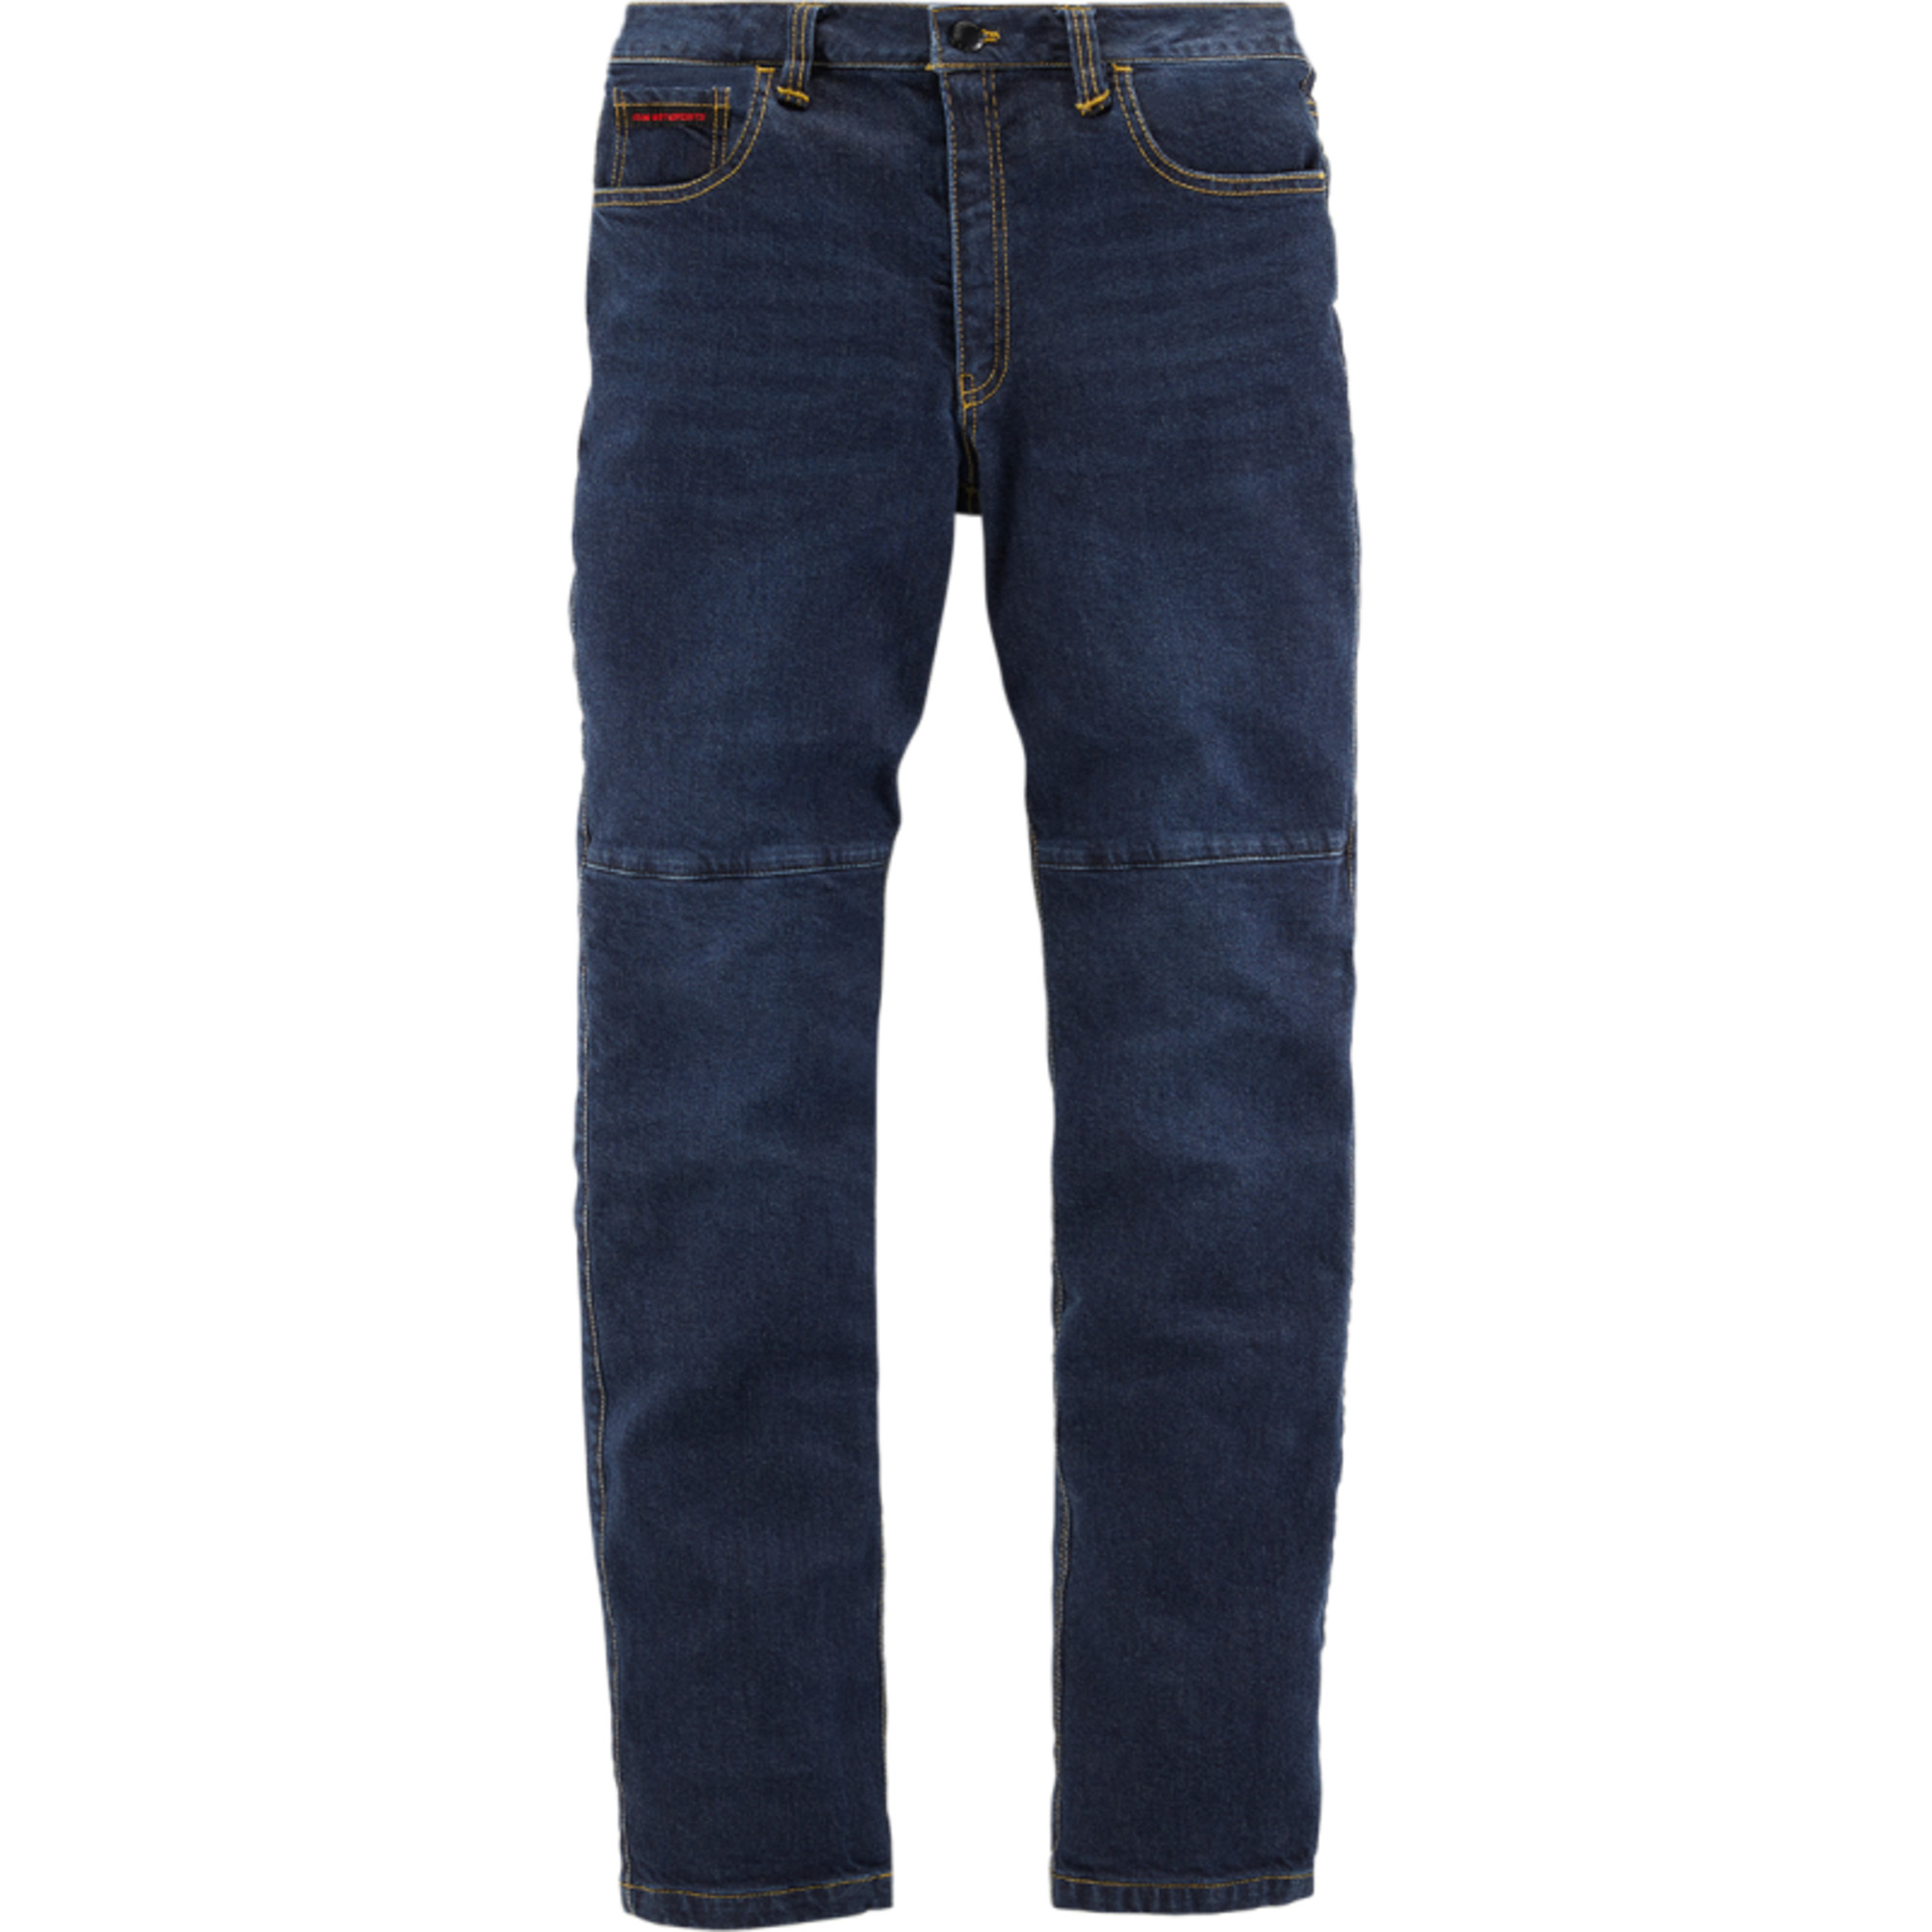  s uparmor jeans